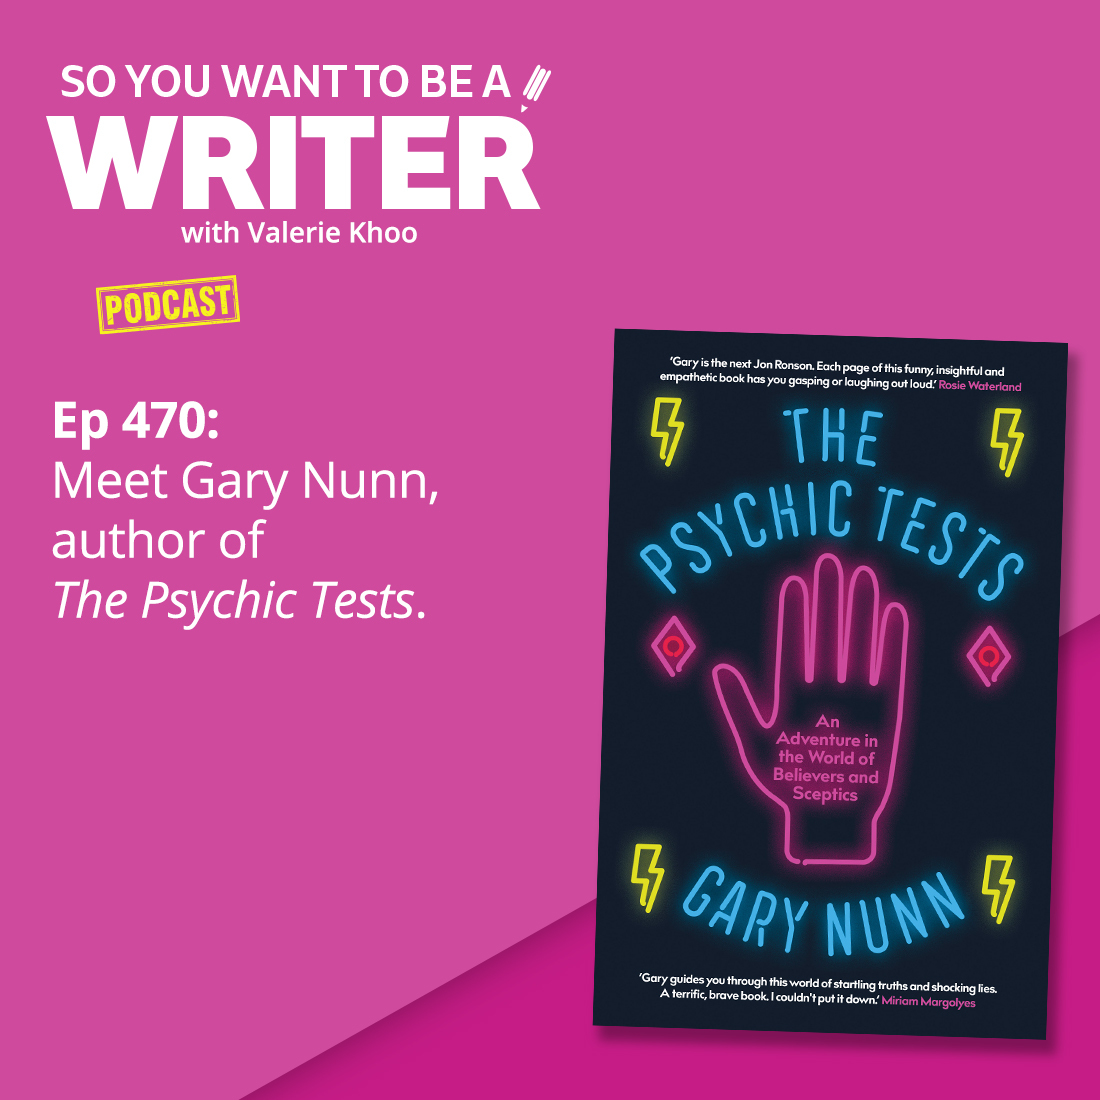 WRITER 470: Meet Gary Nunn, author of 'The Psychic Tests'